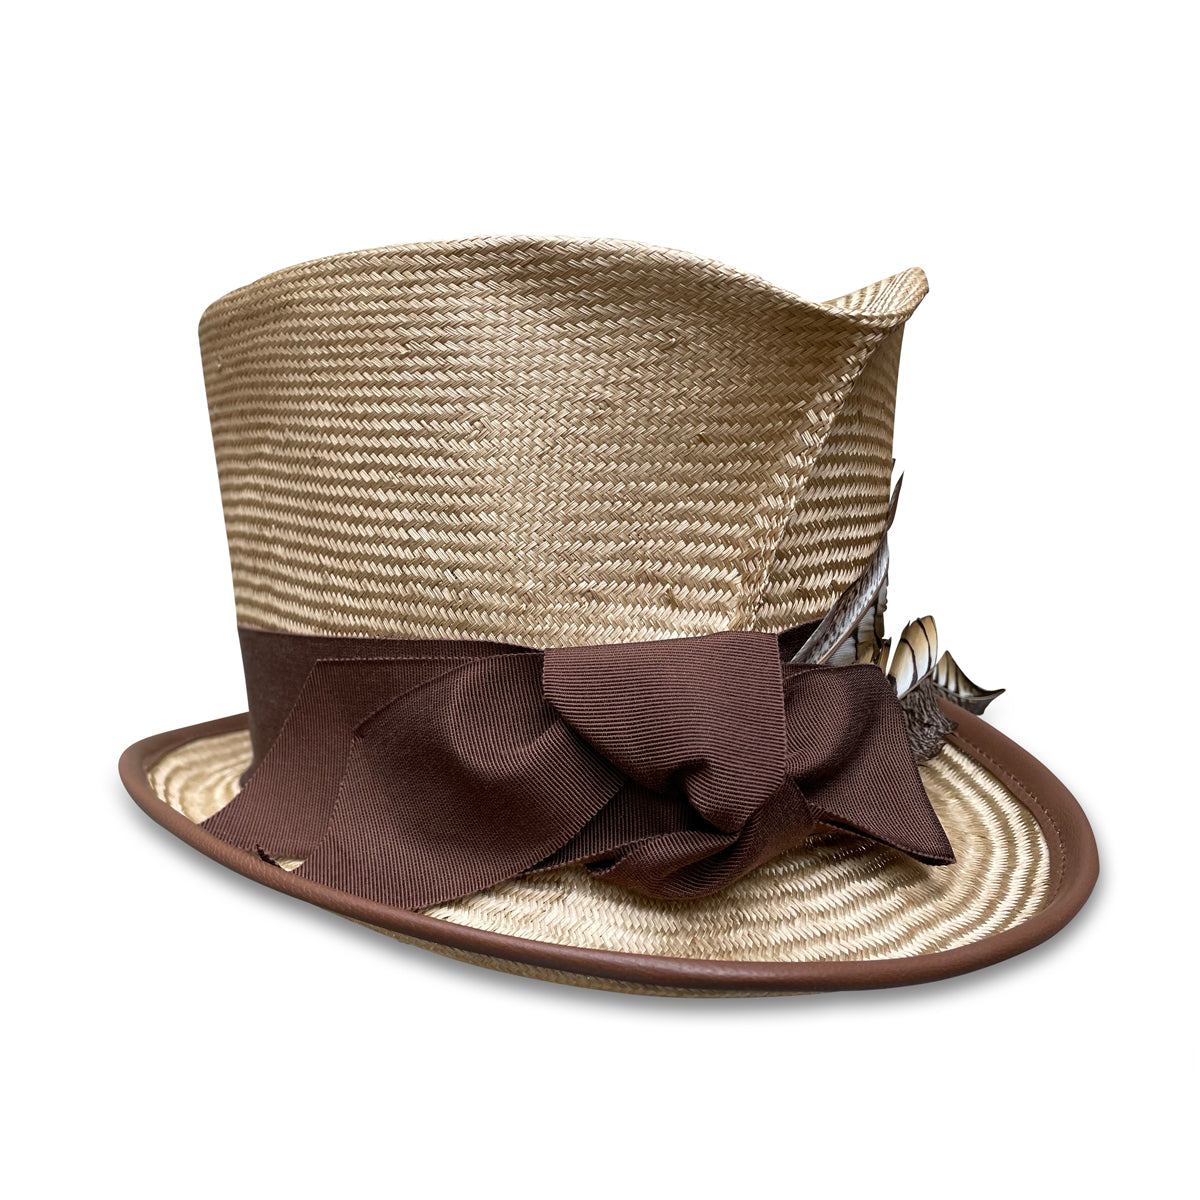 cha Cha's house of Ill Repute Evelyn Top Hat for Kentucky Derby